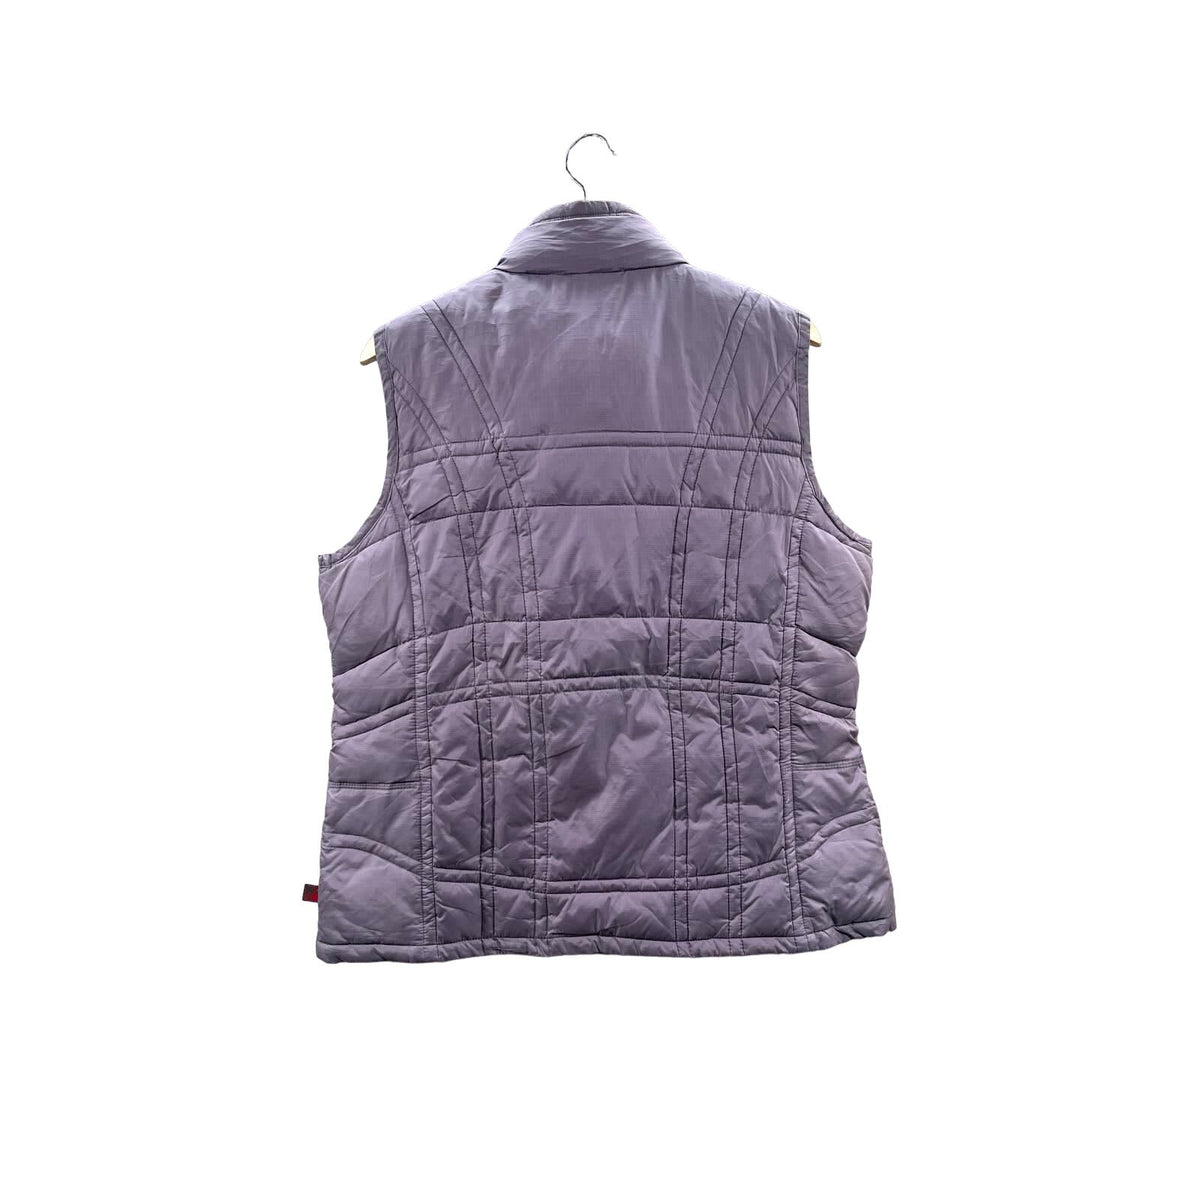 Vintage Woolrich Women's Quilted Outdoor Insulated Puffer Vest